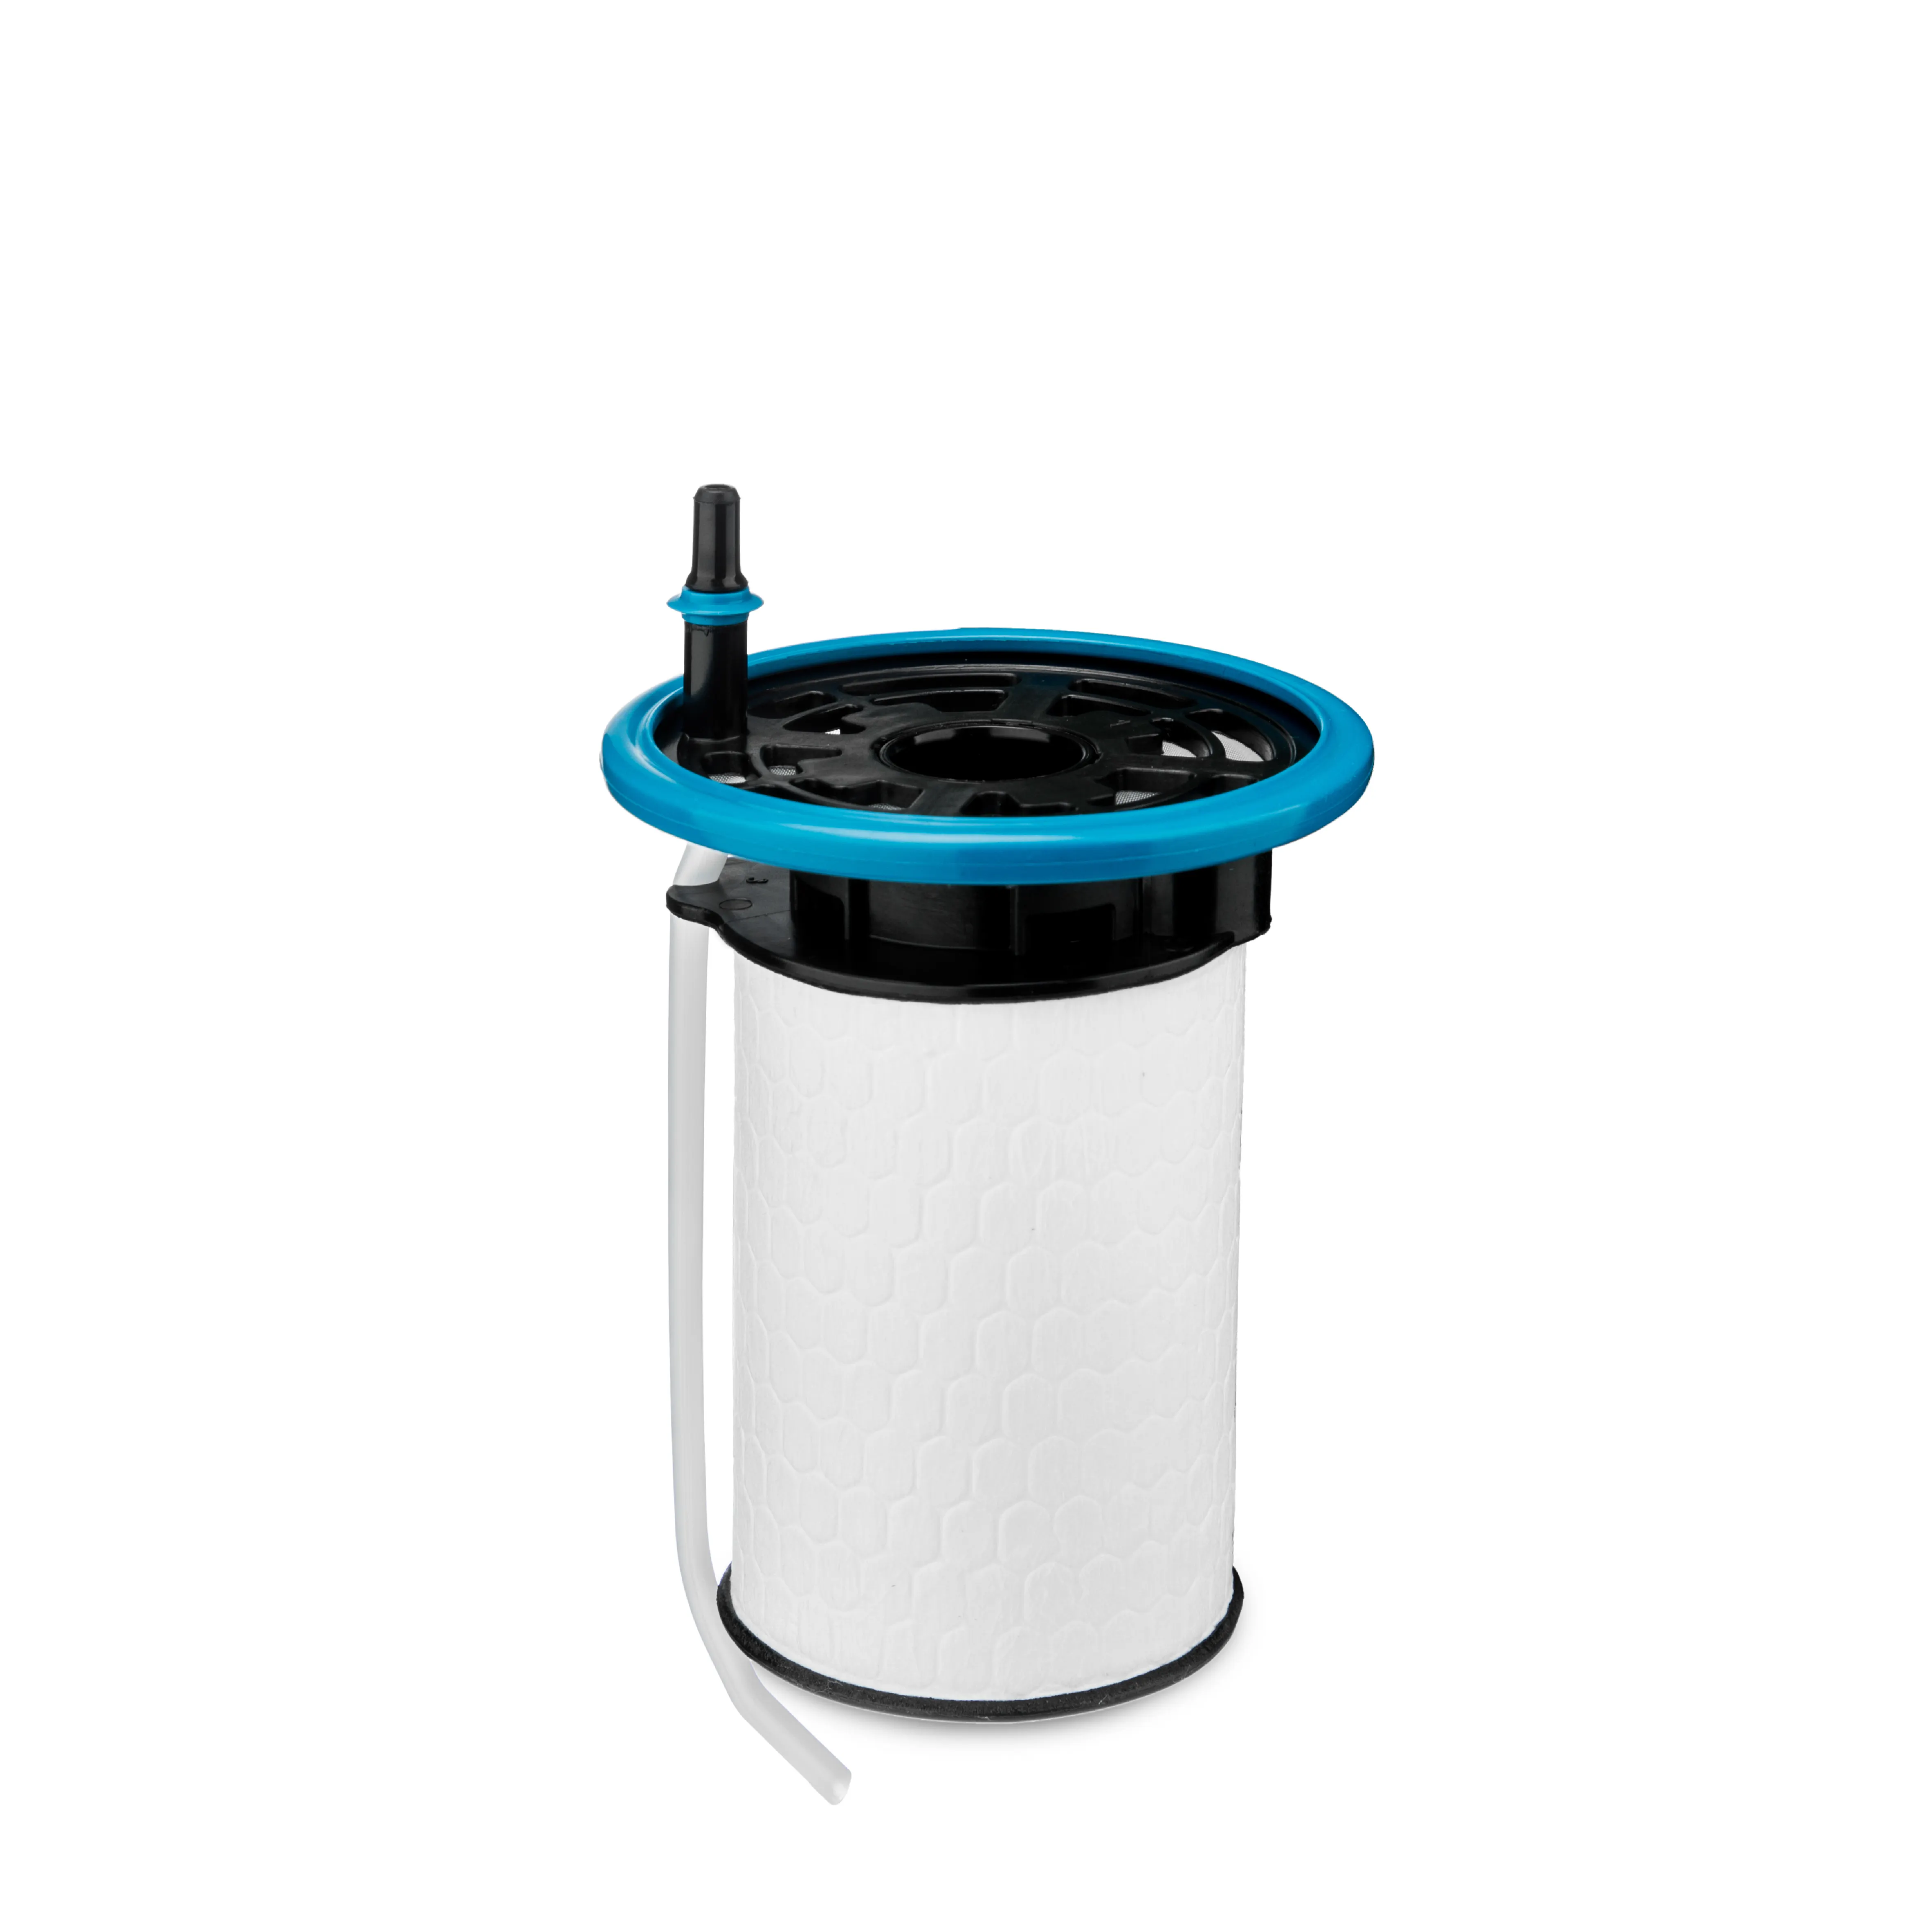 Premium UFI Filters Fuel System Filter - Superior Dirt Removal 26.052.00 - For A Cleaner Engine